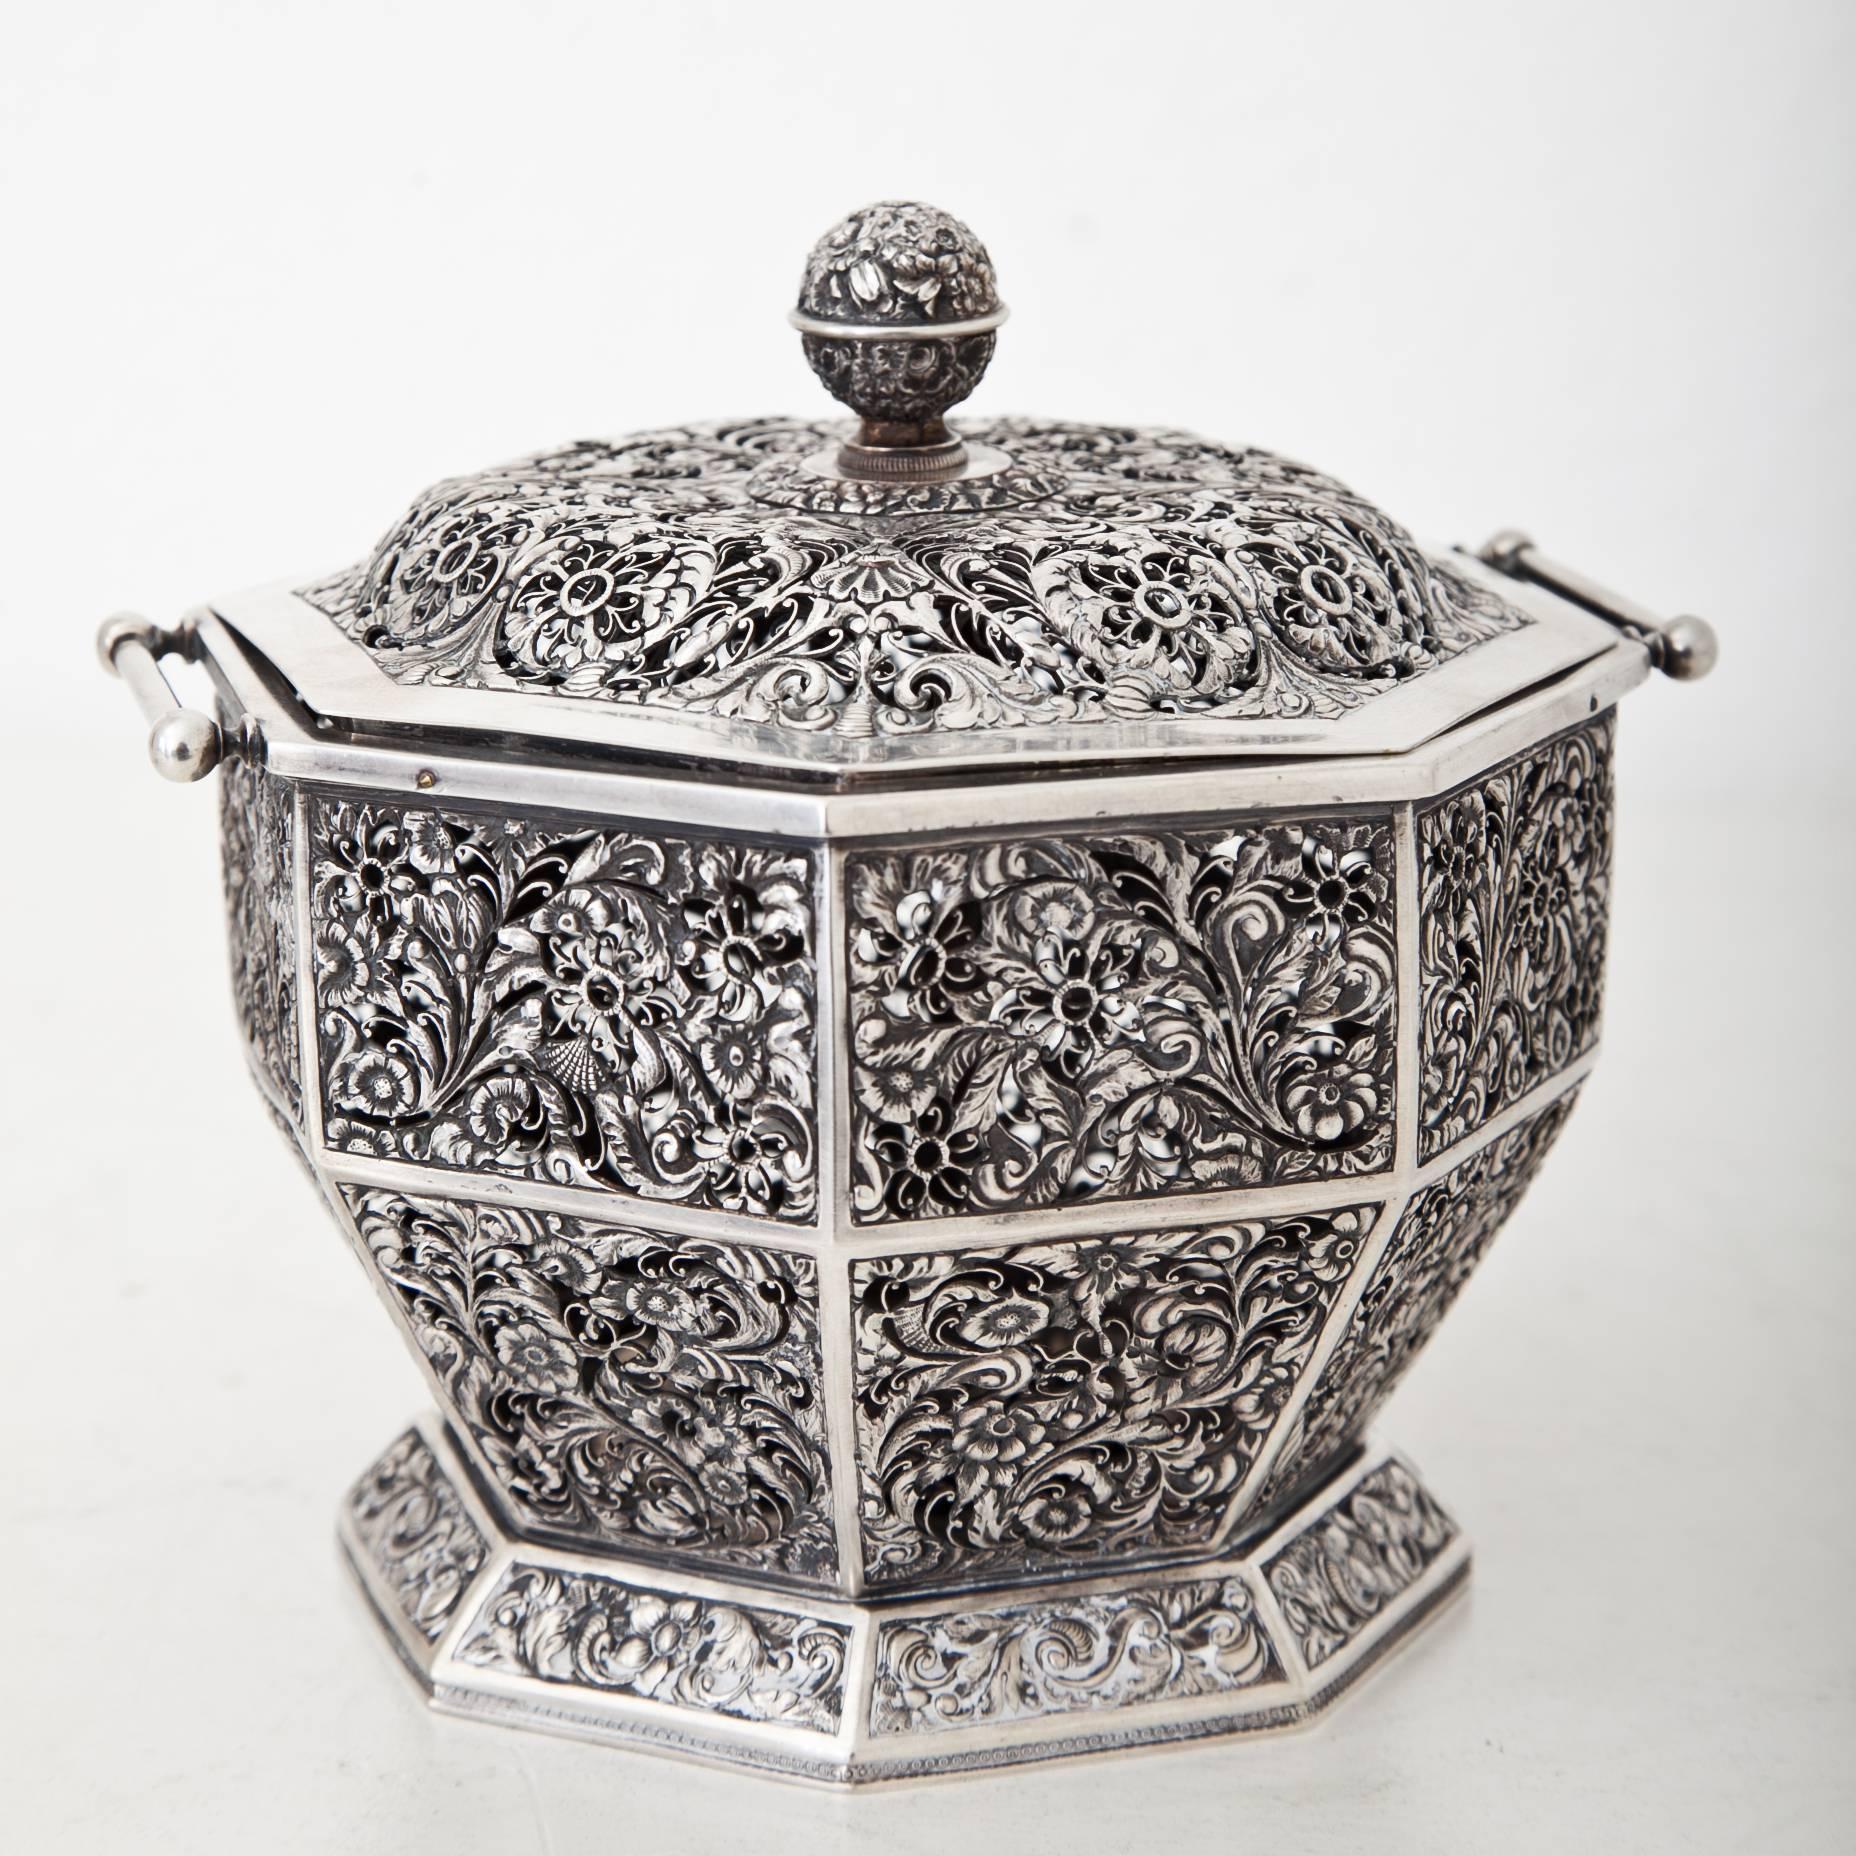 Octagonal scent pot with open worked wall and lid and floral ornaments. The pot is embossed at the bottom with city mark for Vienna and maker's mark IK.